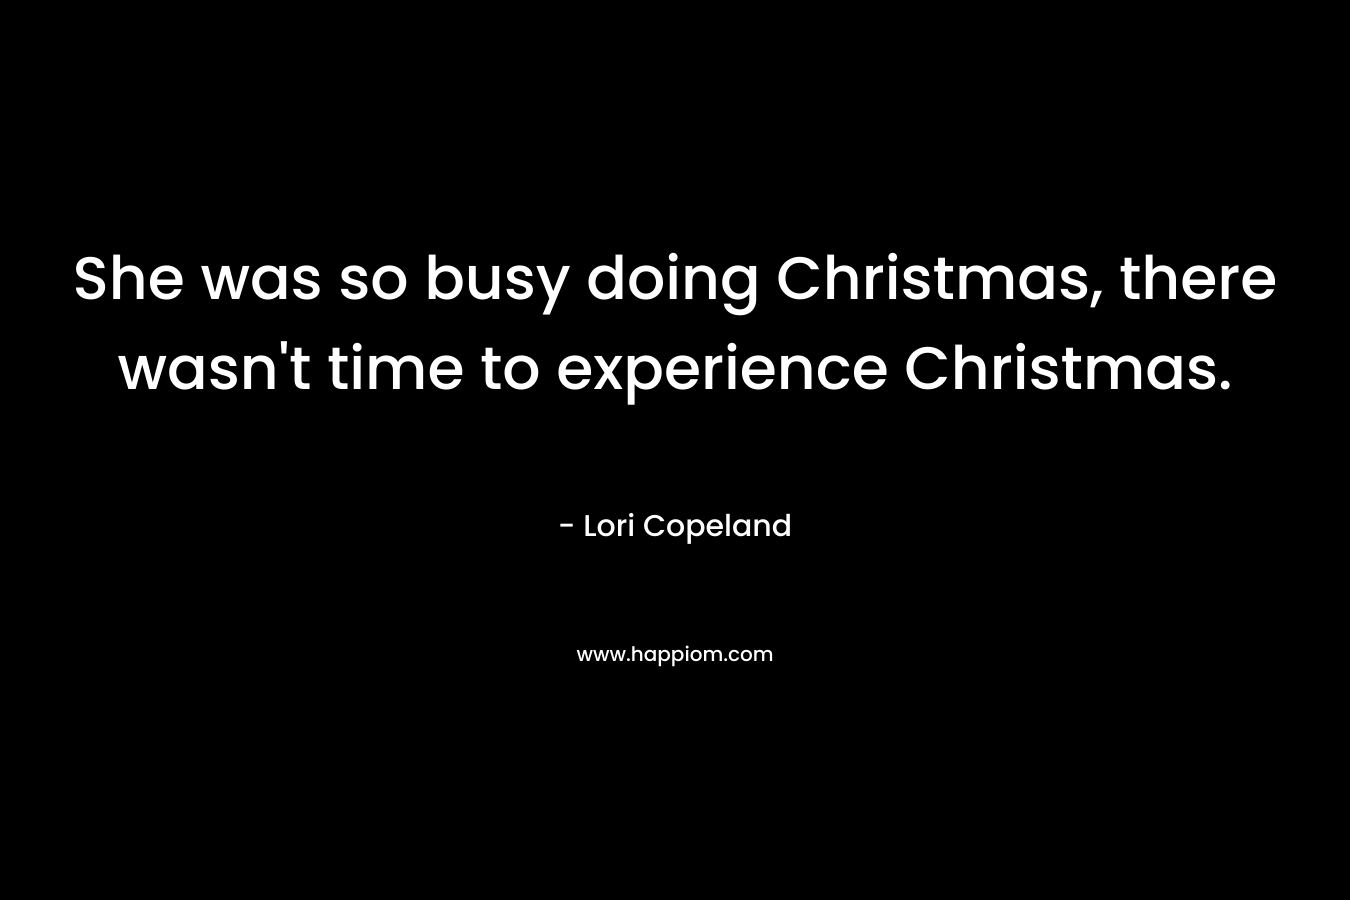 She was so busy doing Christmas, there wasn’t time to experience Christmas. – Lori Copeland